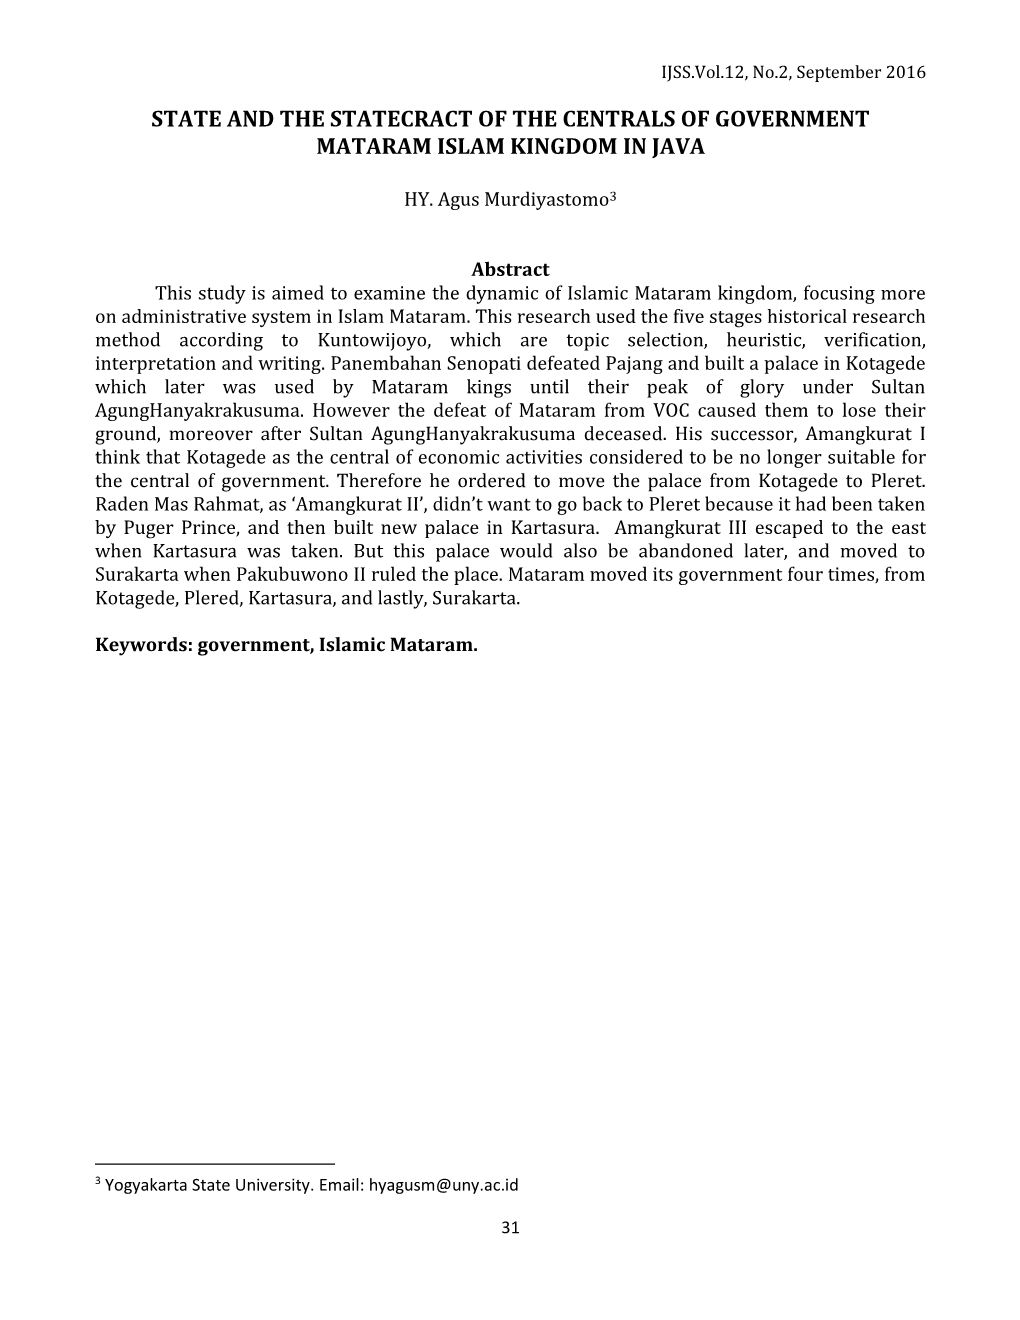 State and the Statecract of the Centrals of Government Mataram Islam Kingdom in Java